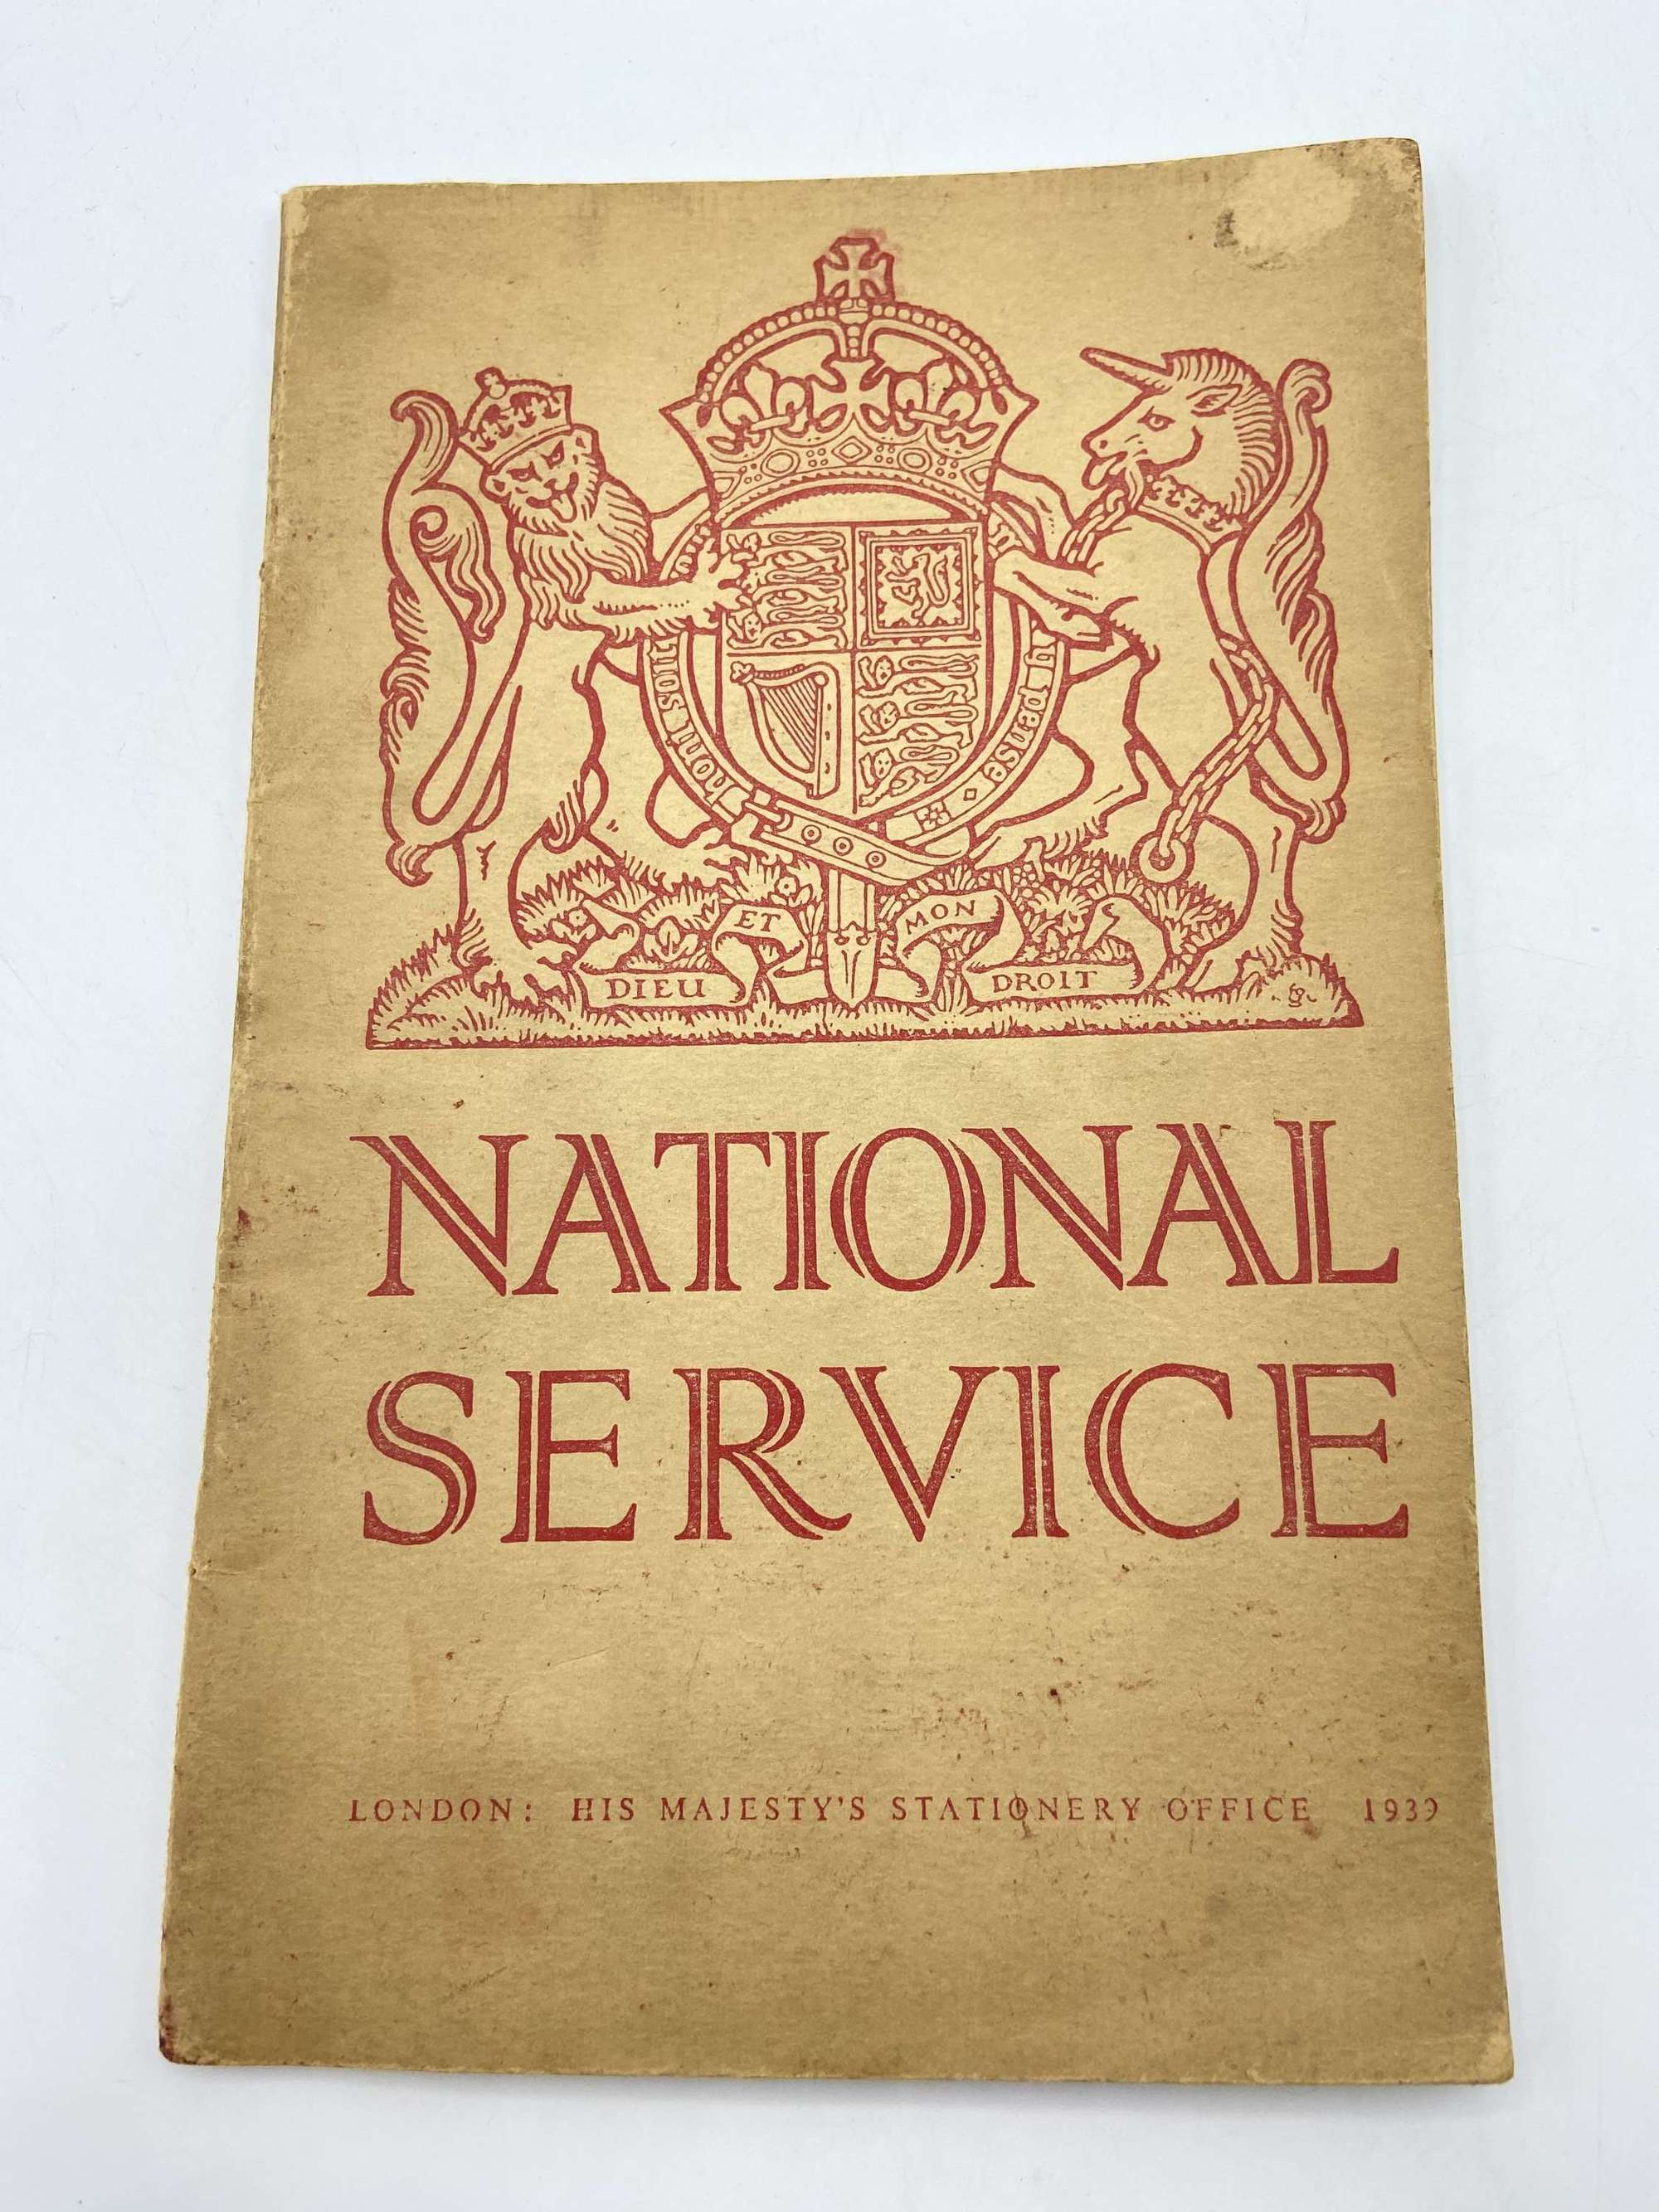 WW2 British 1939 National Service Publication, How You Can Do Your Bit